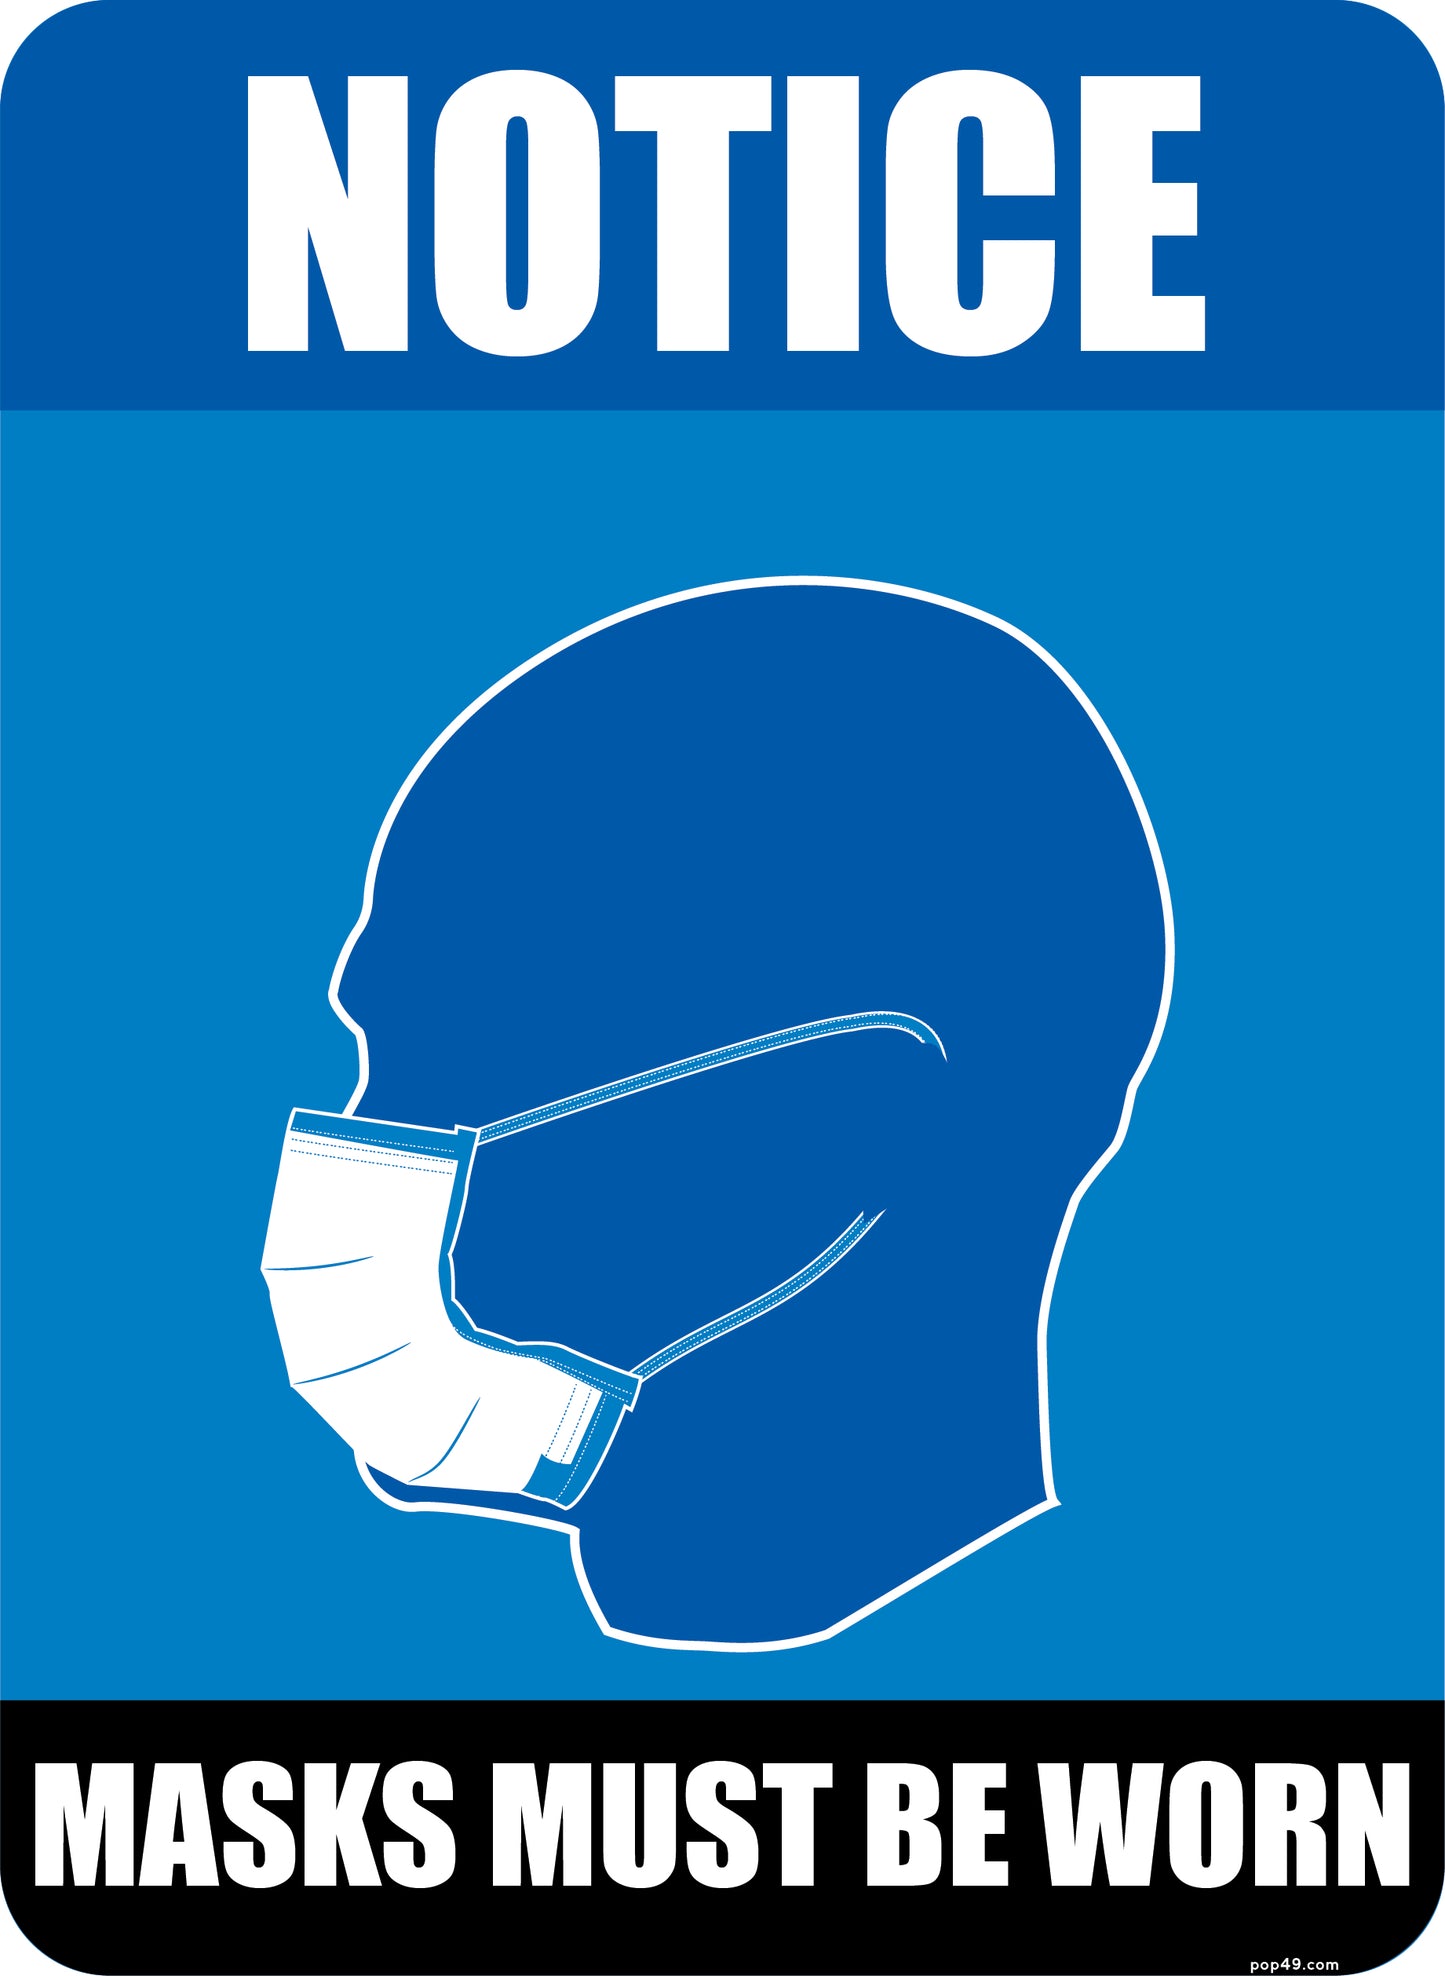 Notice Masks Must Be Worn Sign - 8" x 11"